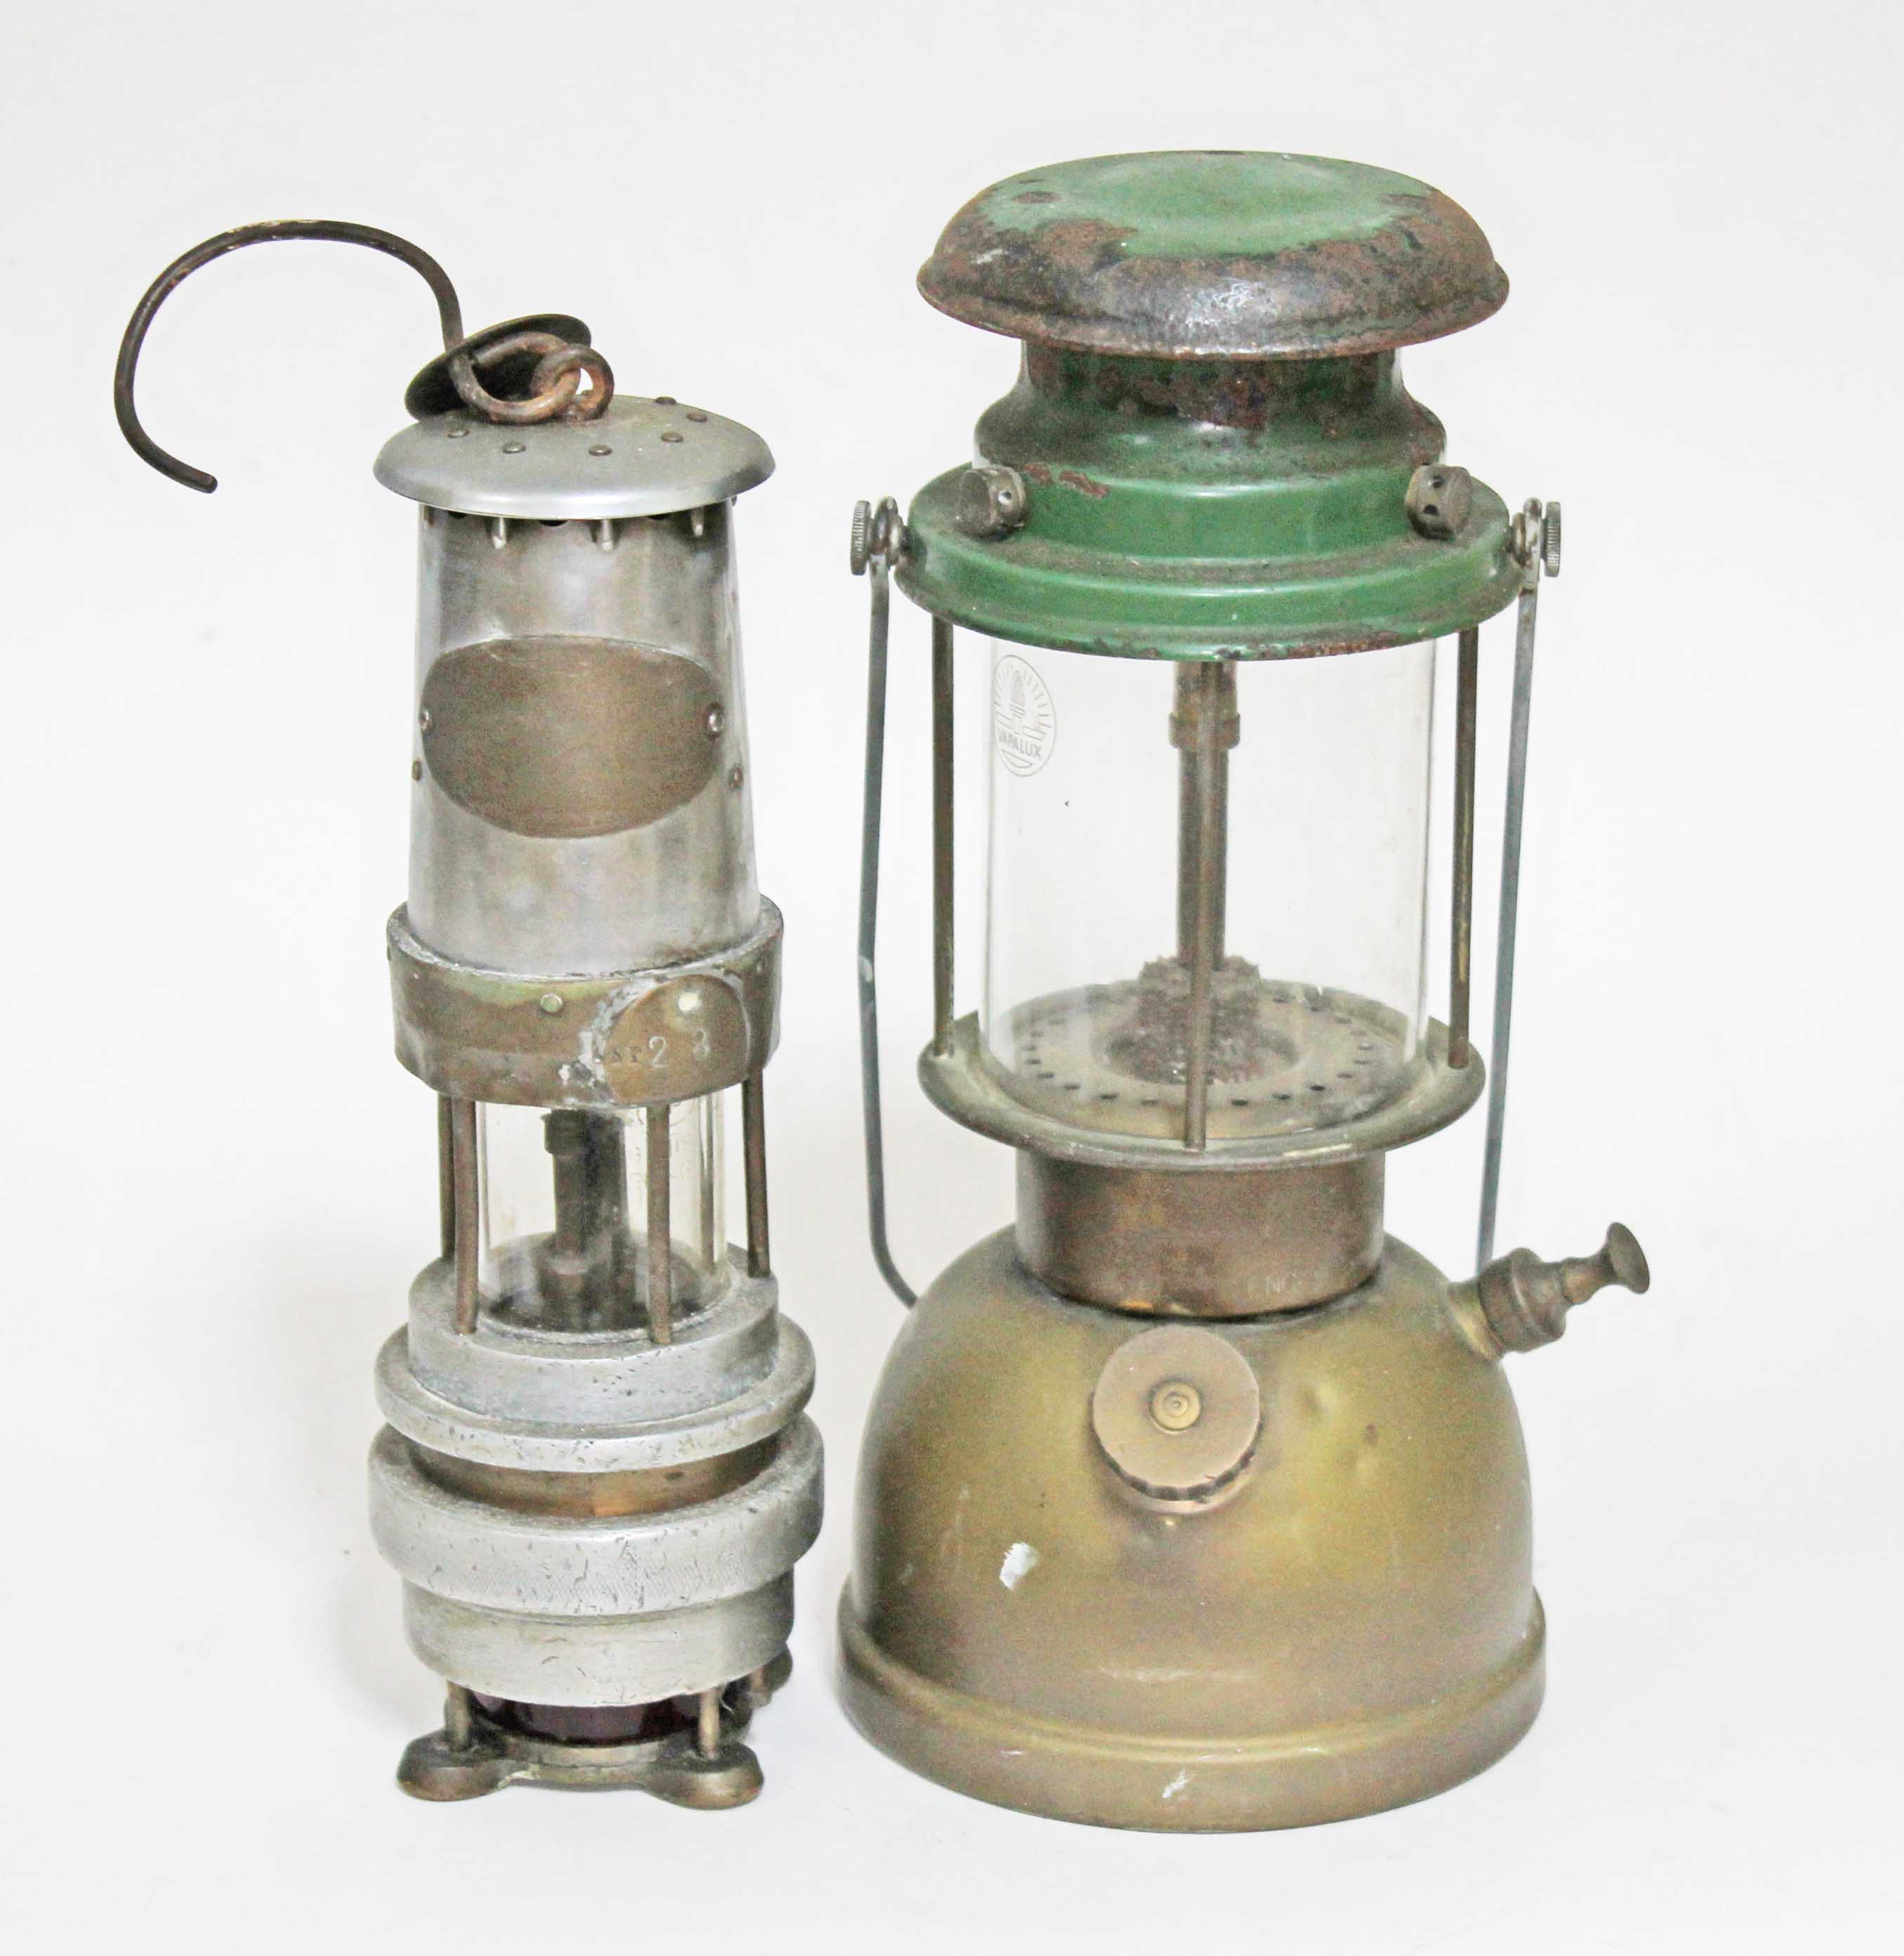 A miner's lamp and a paraffin lamp.